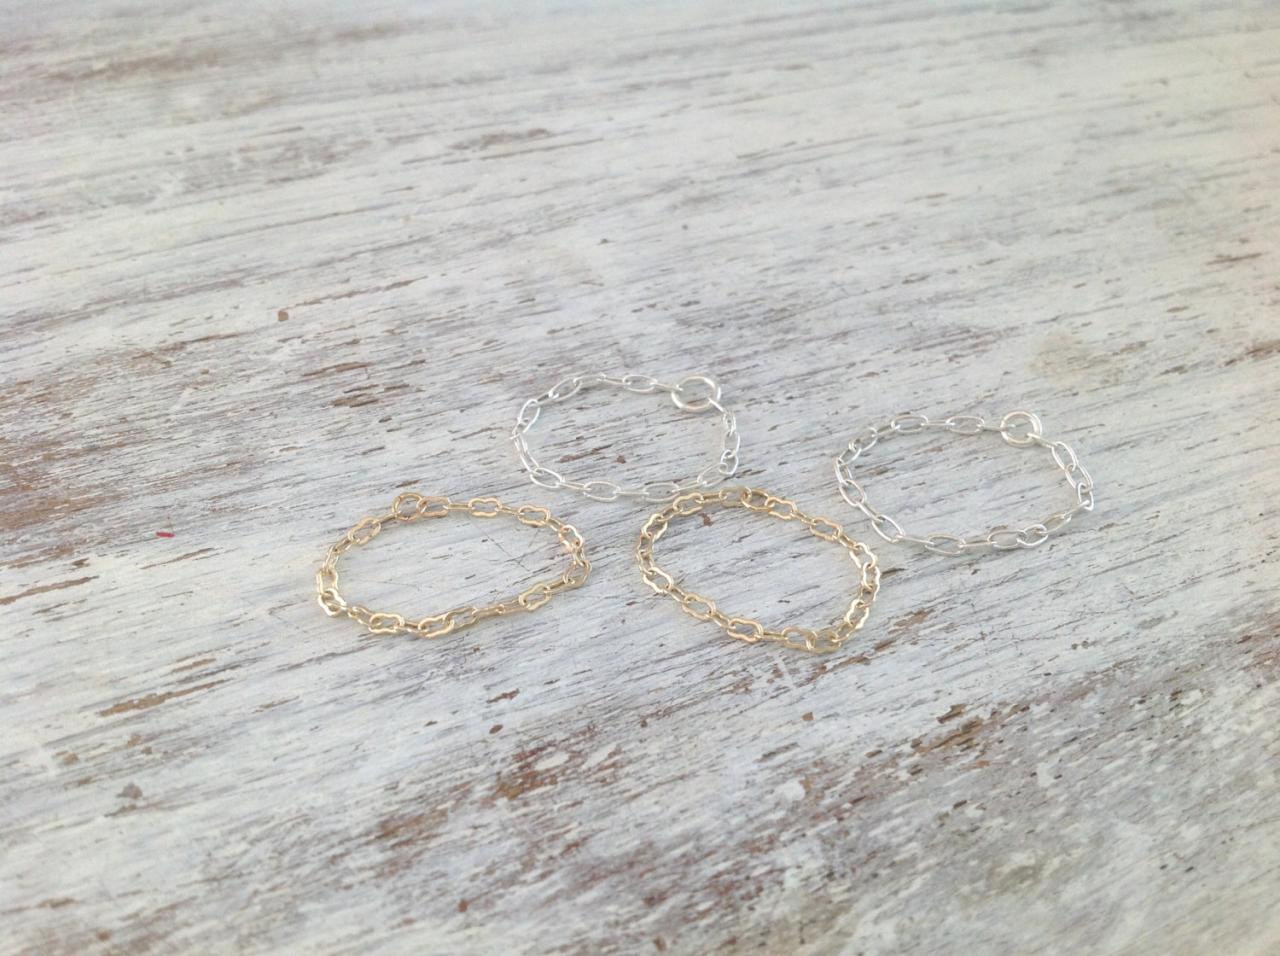 Knuckle Ring, Thin Ring, Silver And Gold, Knuckle Rings, Set Of 4 Rings, Tiny Ring, Dainty Ring, Thin Rings, Any Size- Cr4